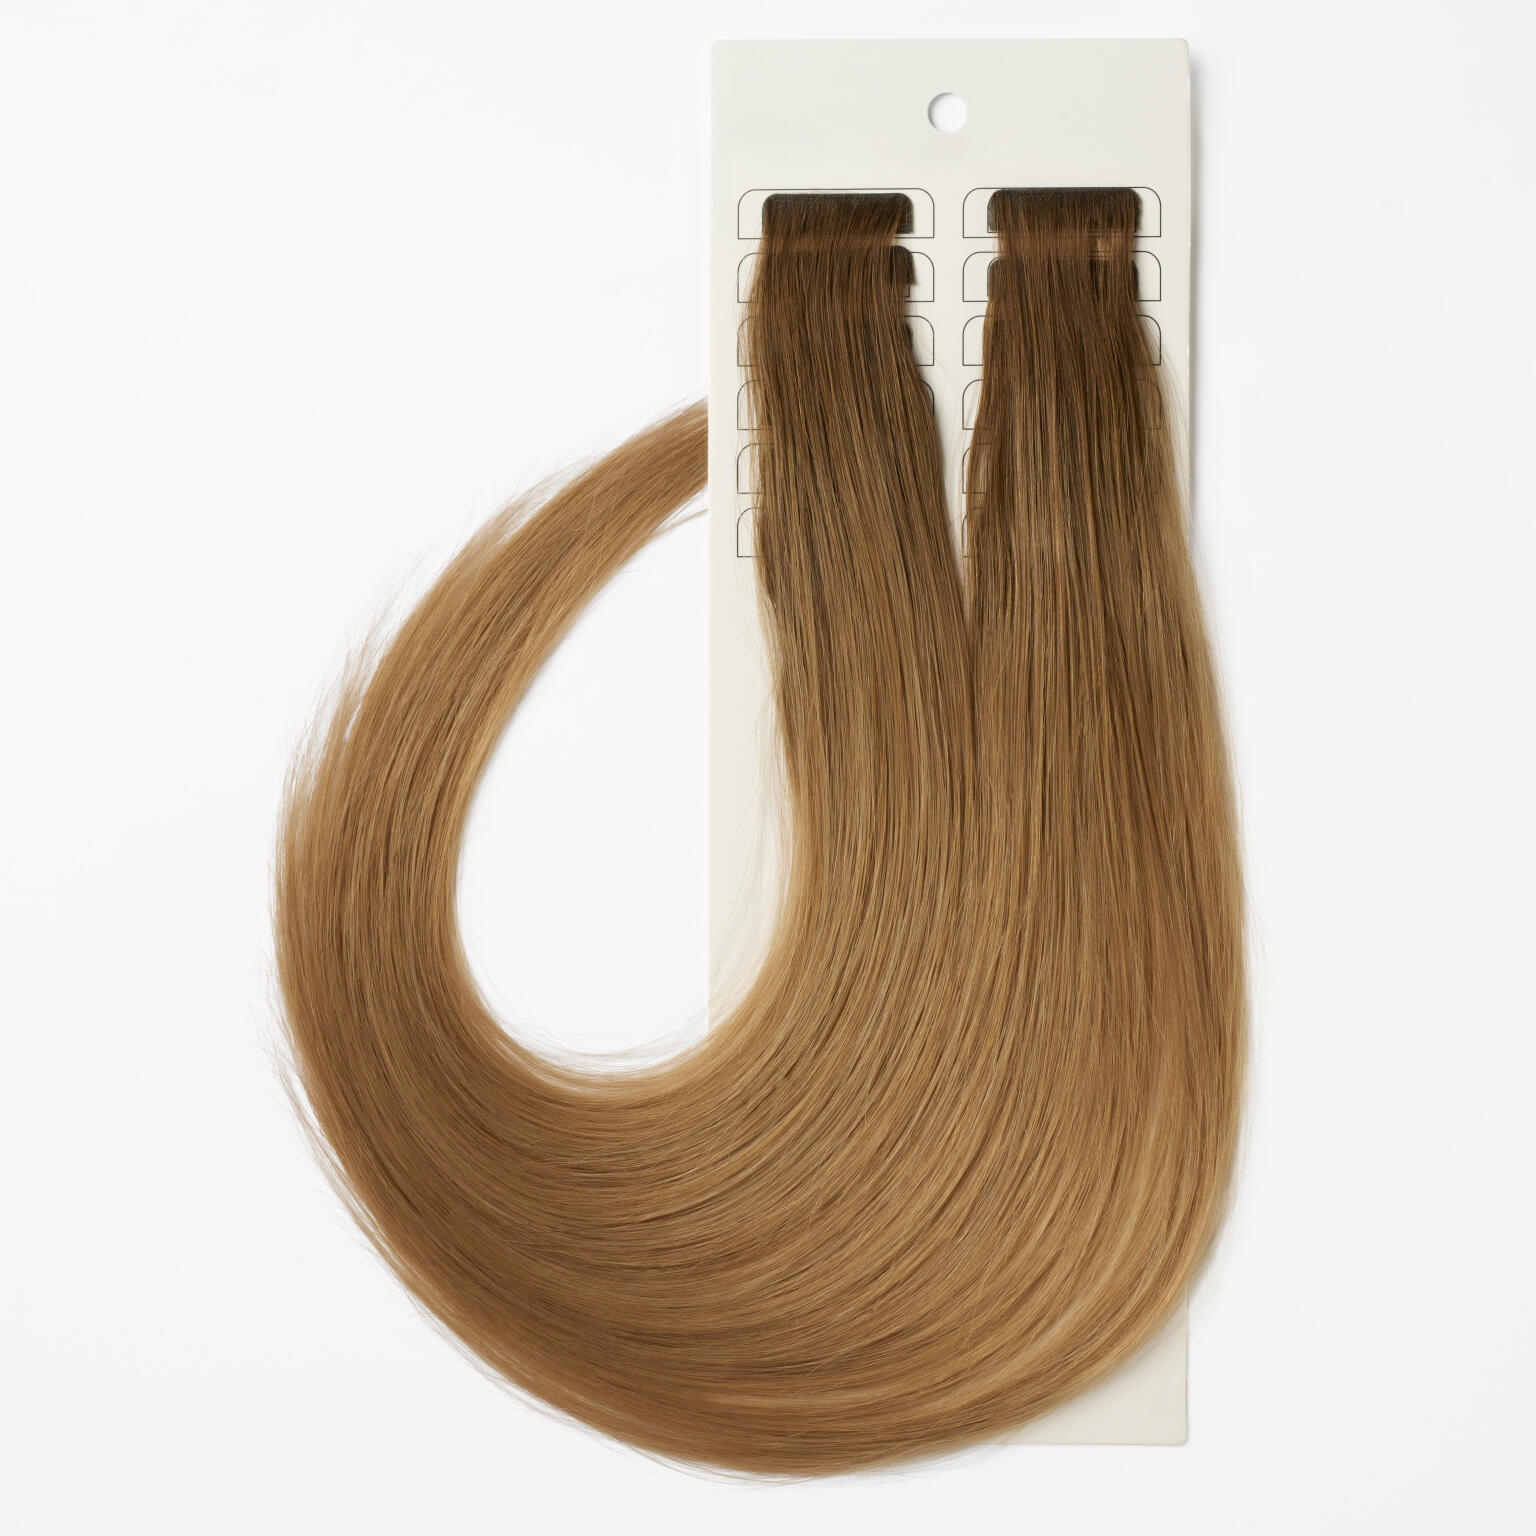 Luxe Tape Extensions Seamless 3 CM6.3/9.93 60 cm